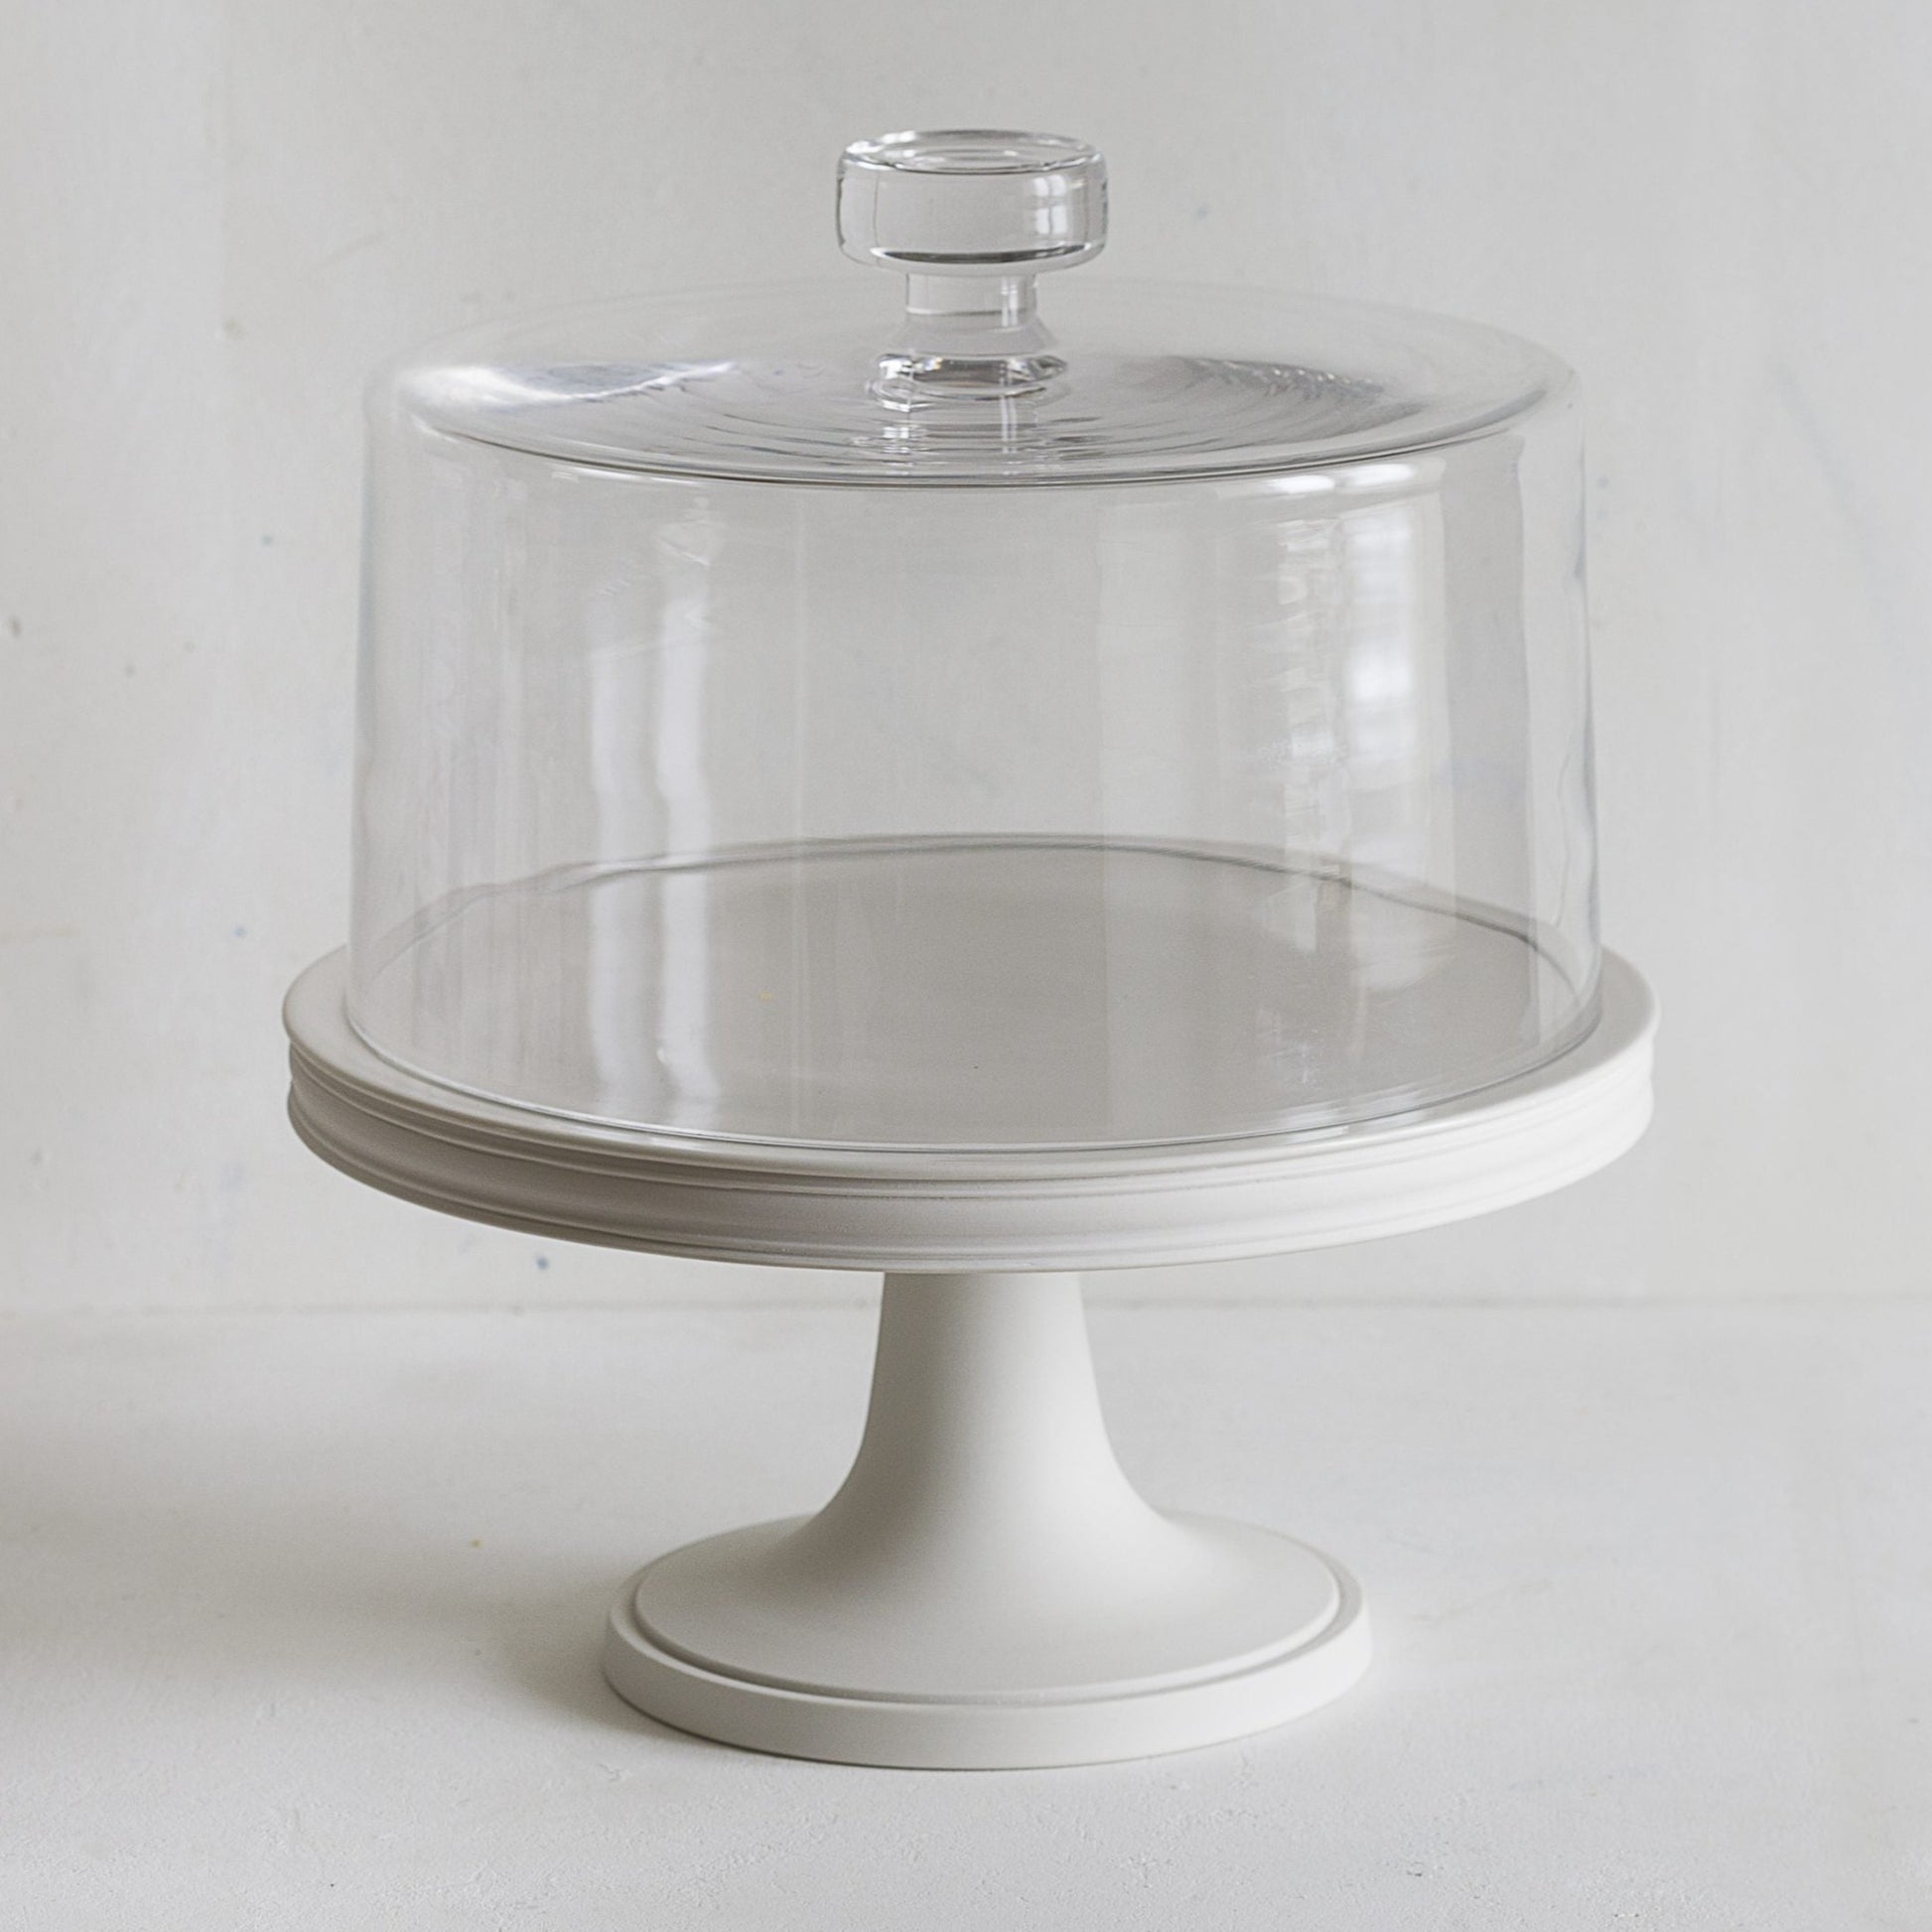 Classical Cake Stand, Large